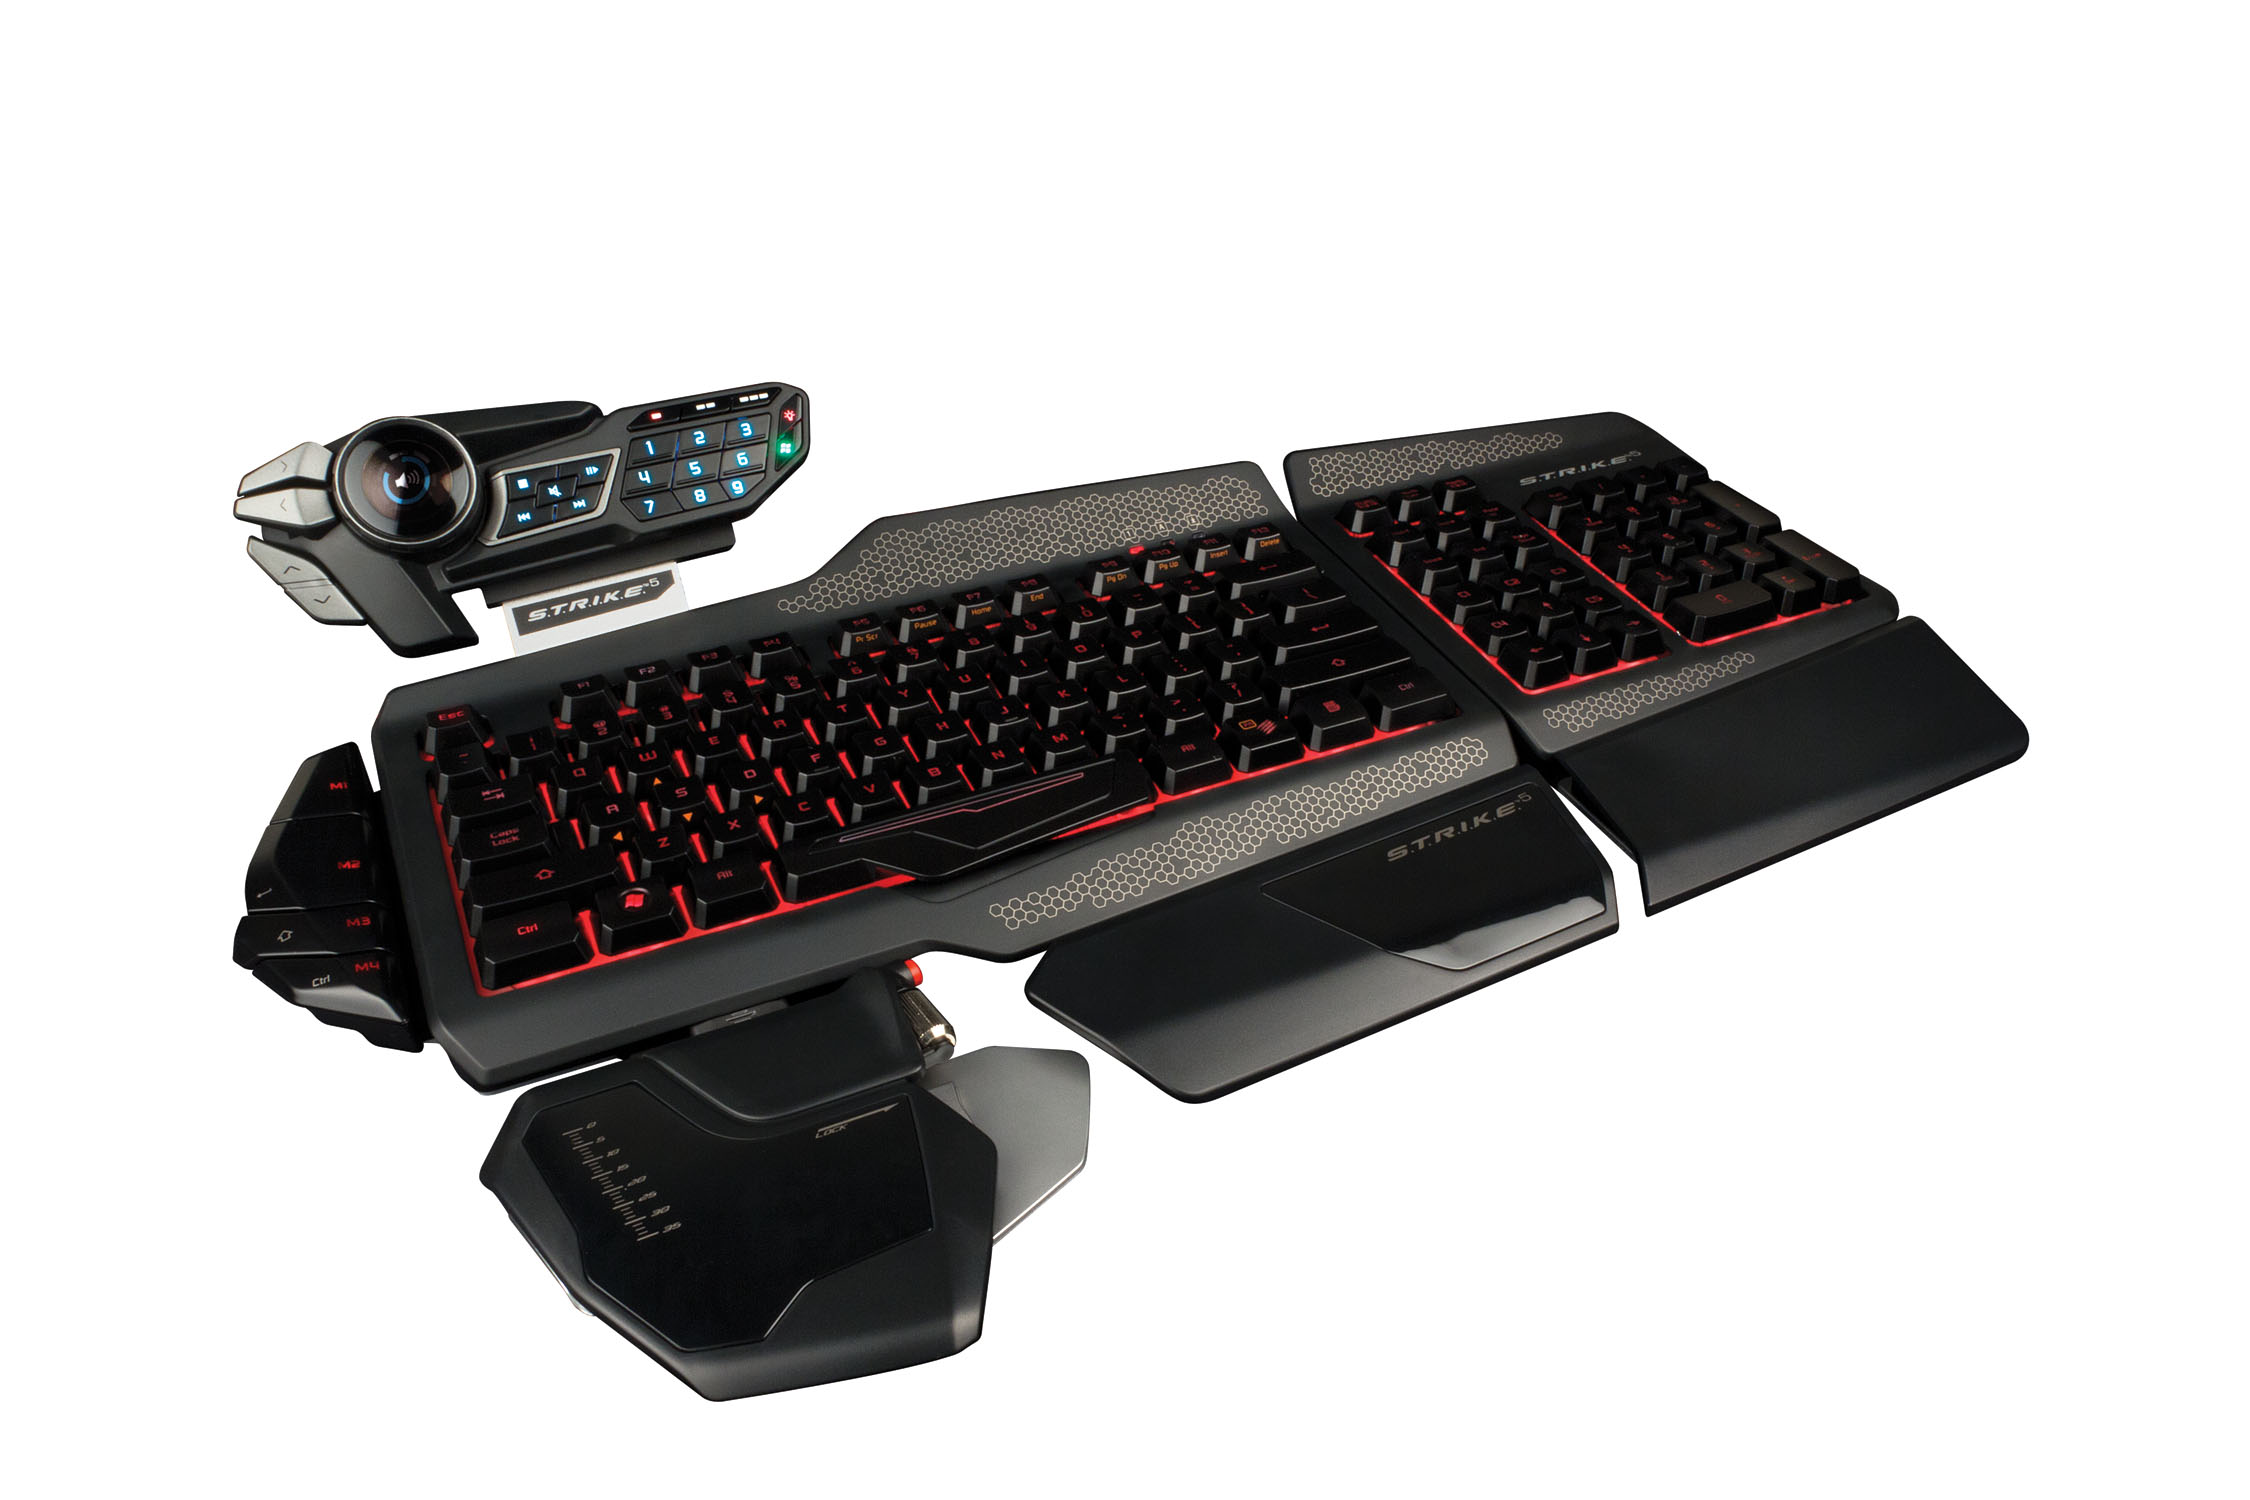 Mad Catz Announces the S.T.R.I.K.E.5 Professional Gaming Keyboard